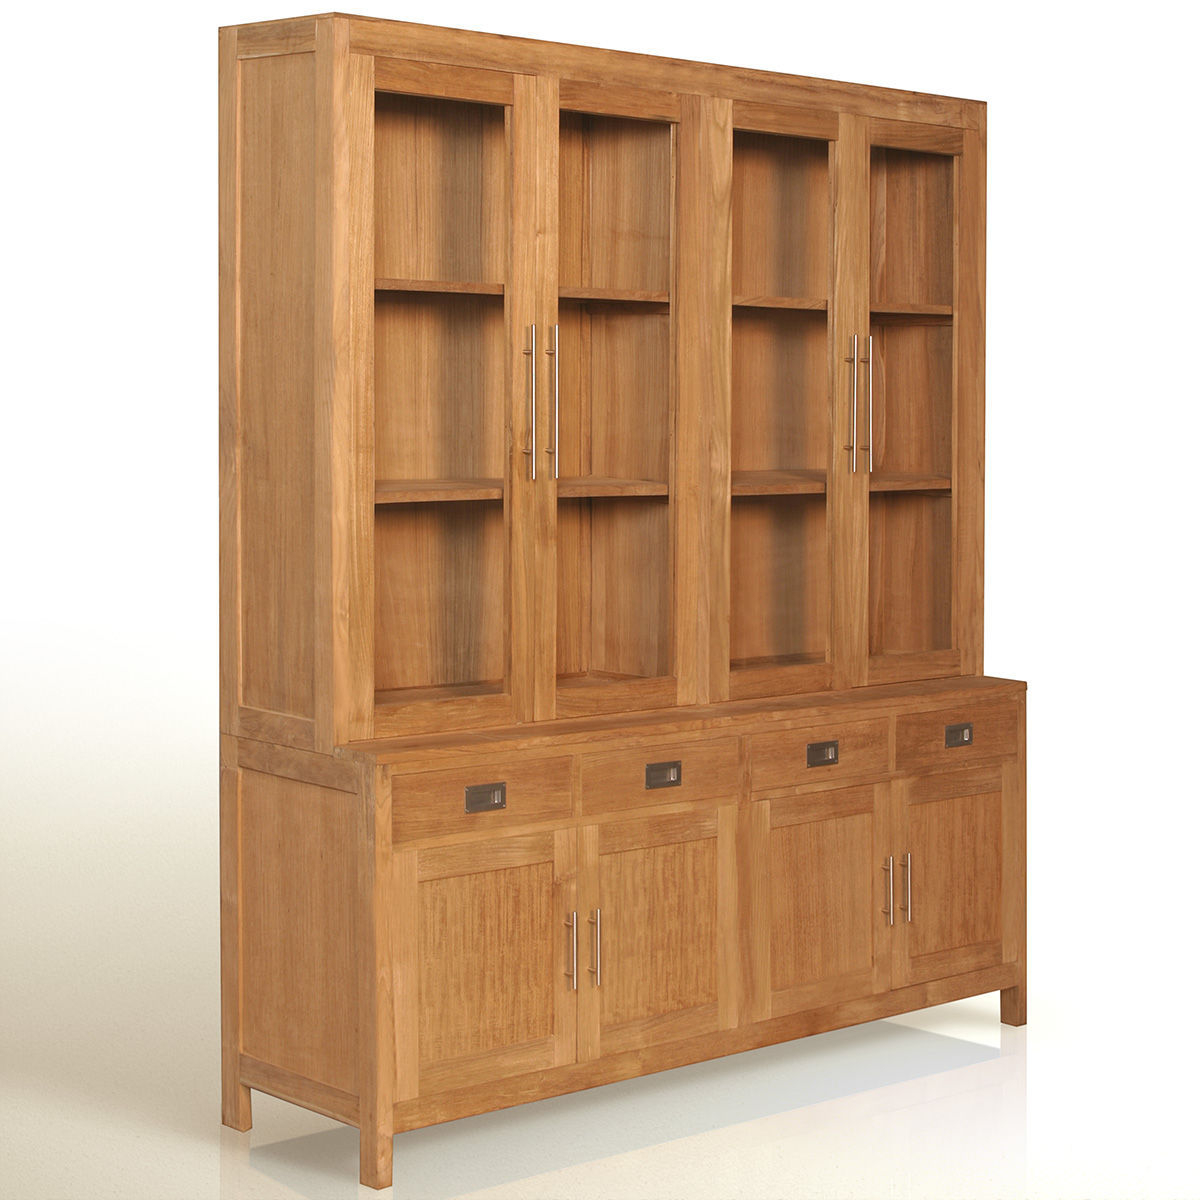 Hobuk Display Cabinet 4 Drawers in size 1200 X 1200